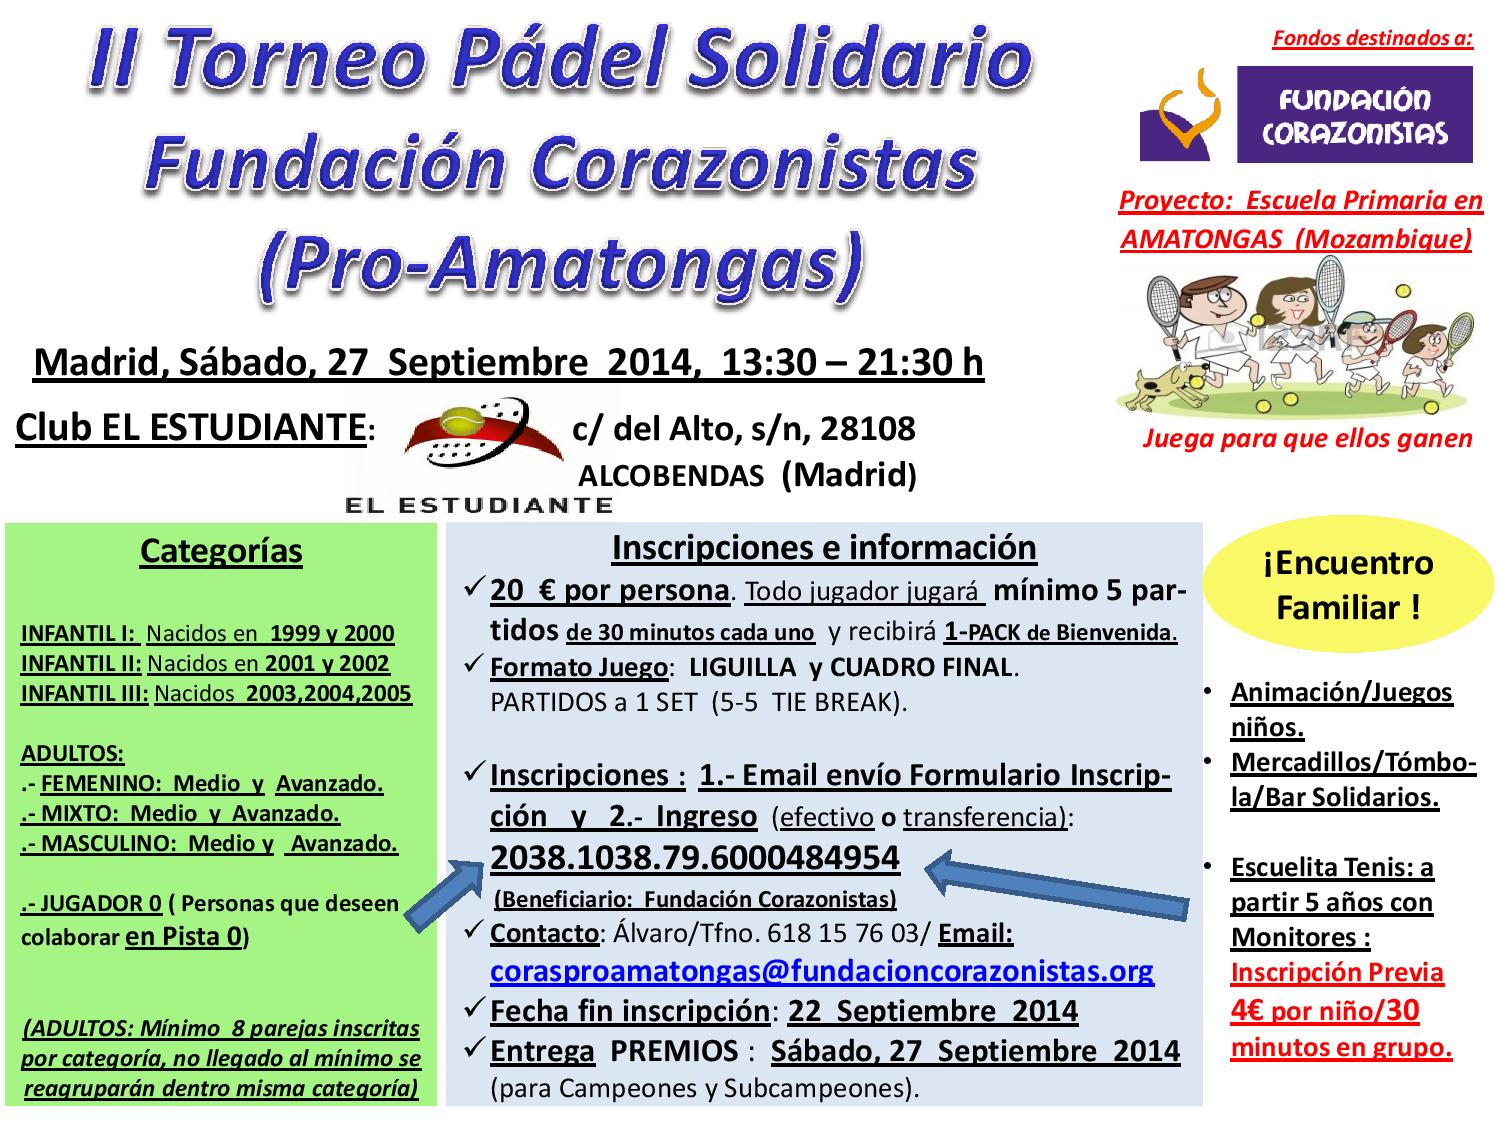 CONVOCATORIA__II_Torneo_PDEL_FC_AMATONGAS_27_09_2014._AM-page-001